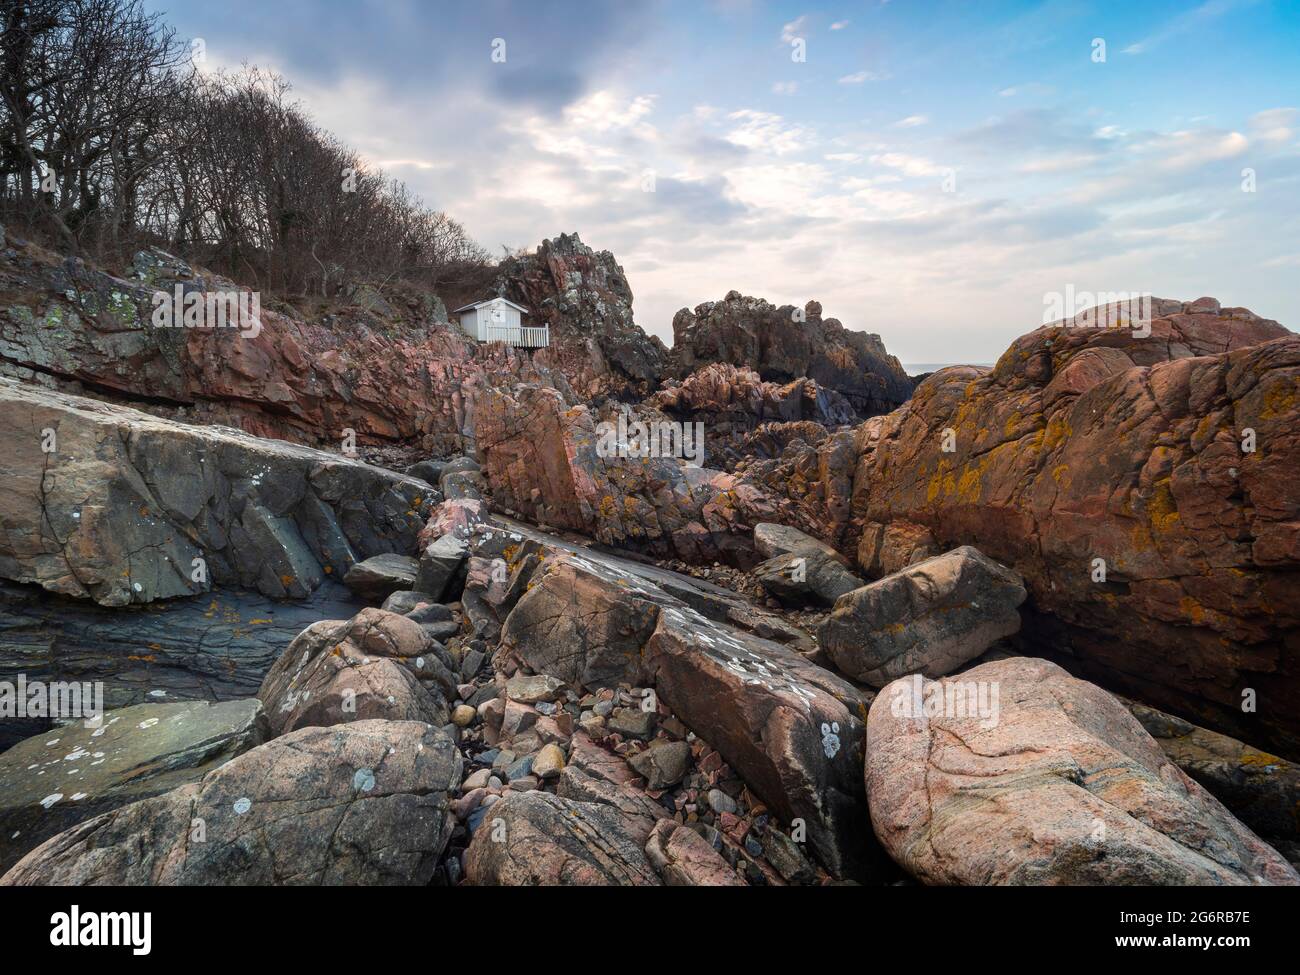 Dramatic cliff landscape with small cttage on the edge. Arild, Sweden. Stock Photo